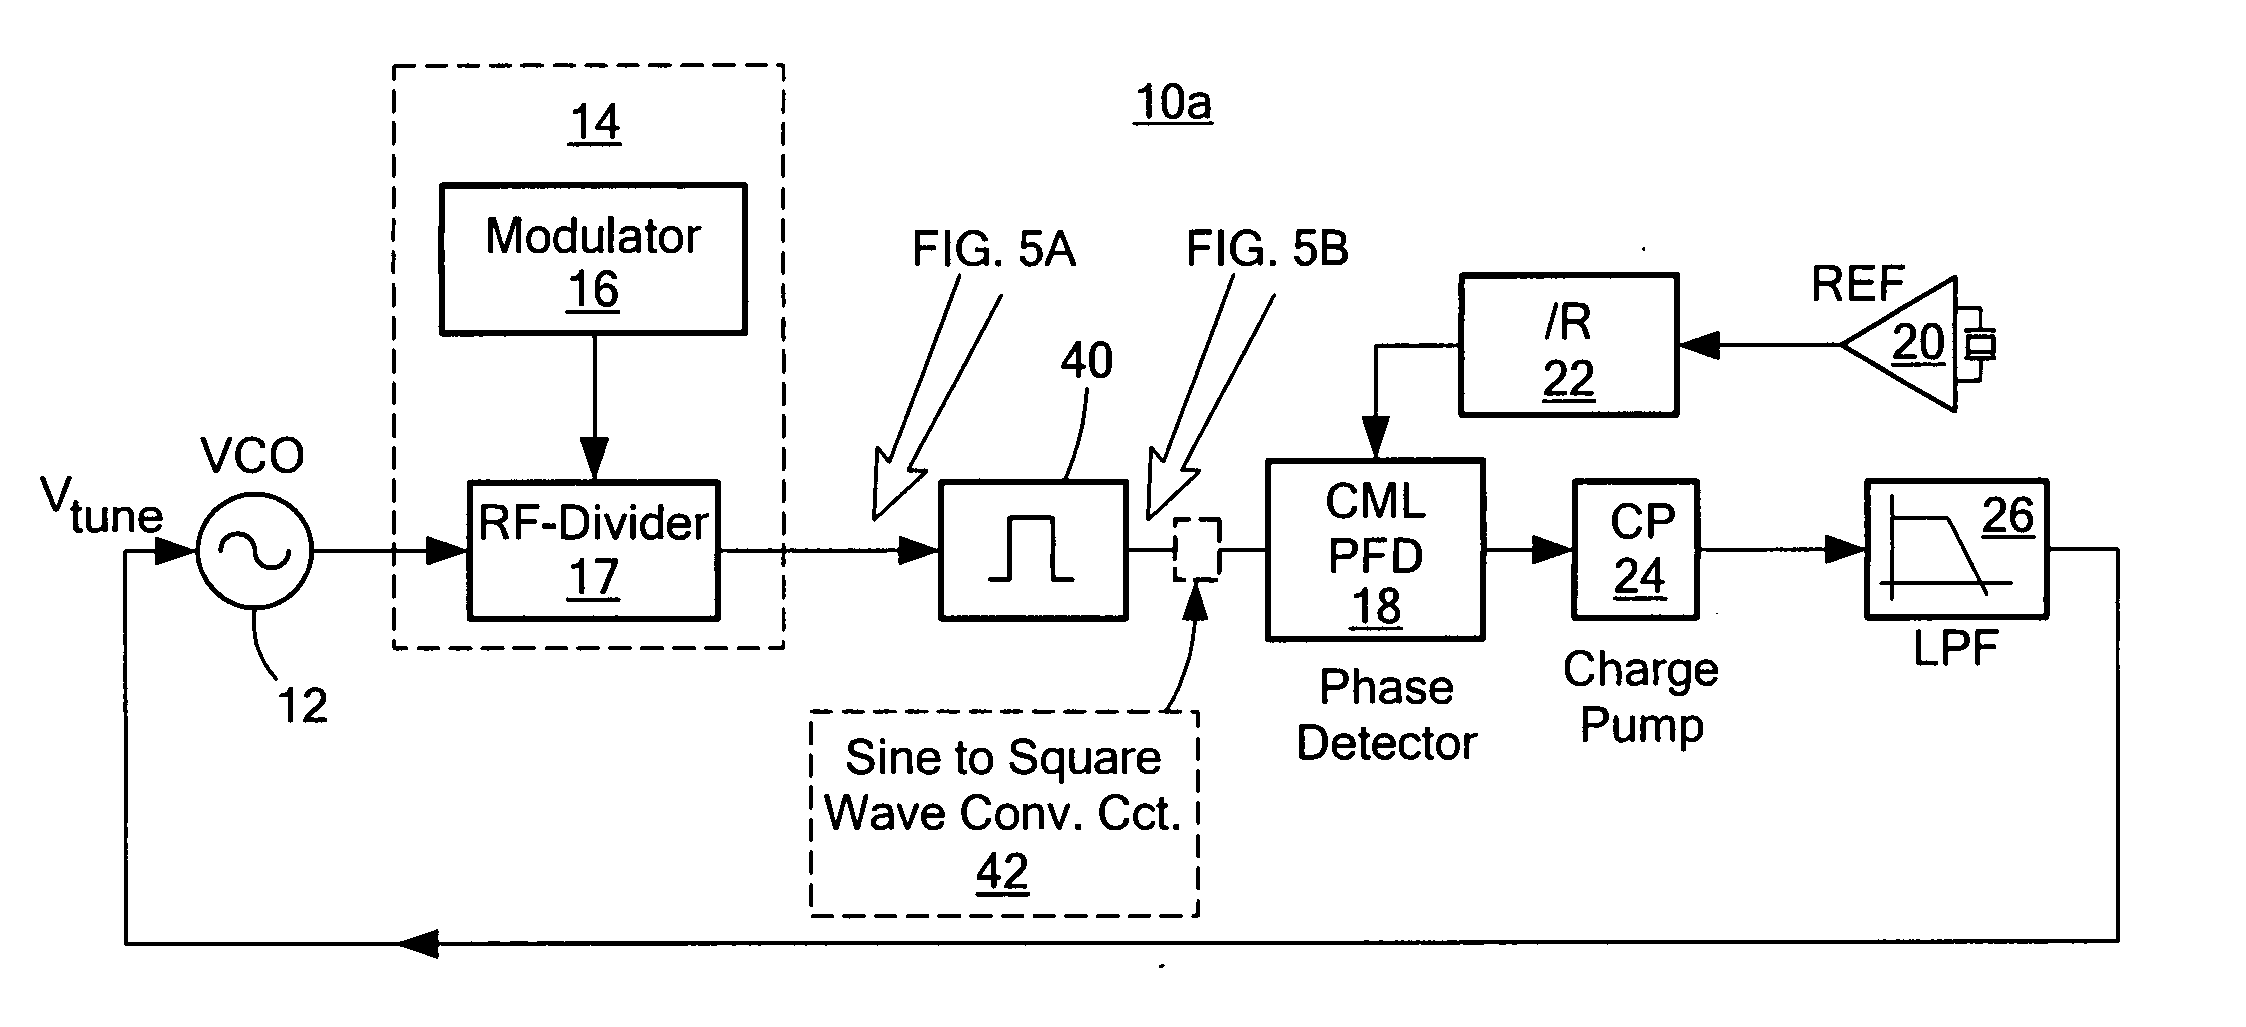 Fractional-N frequency synthesizer having reduced fractional switching noise